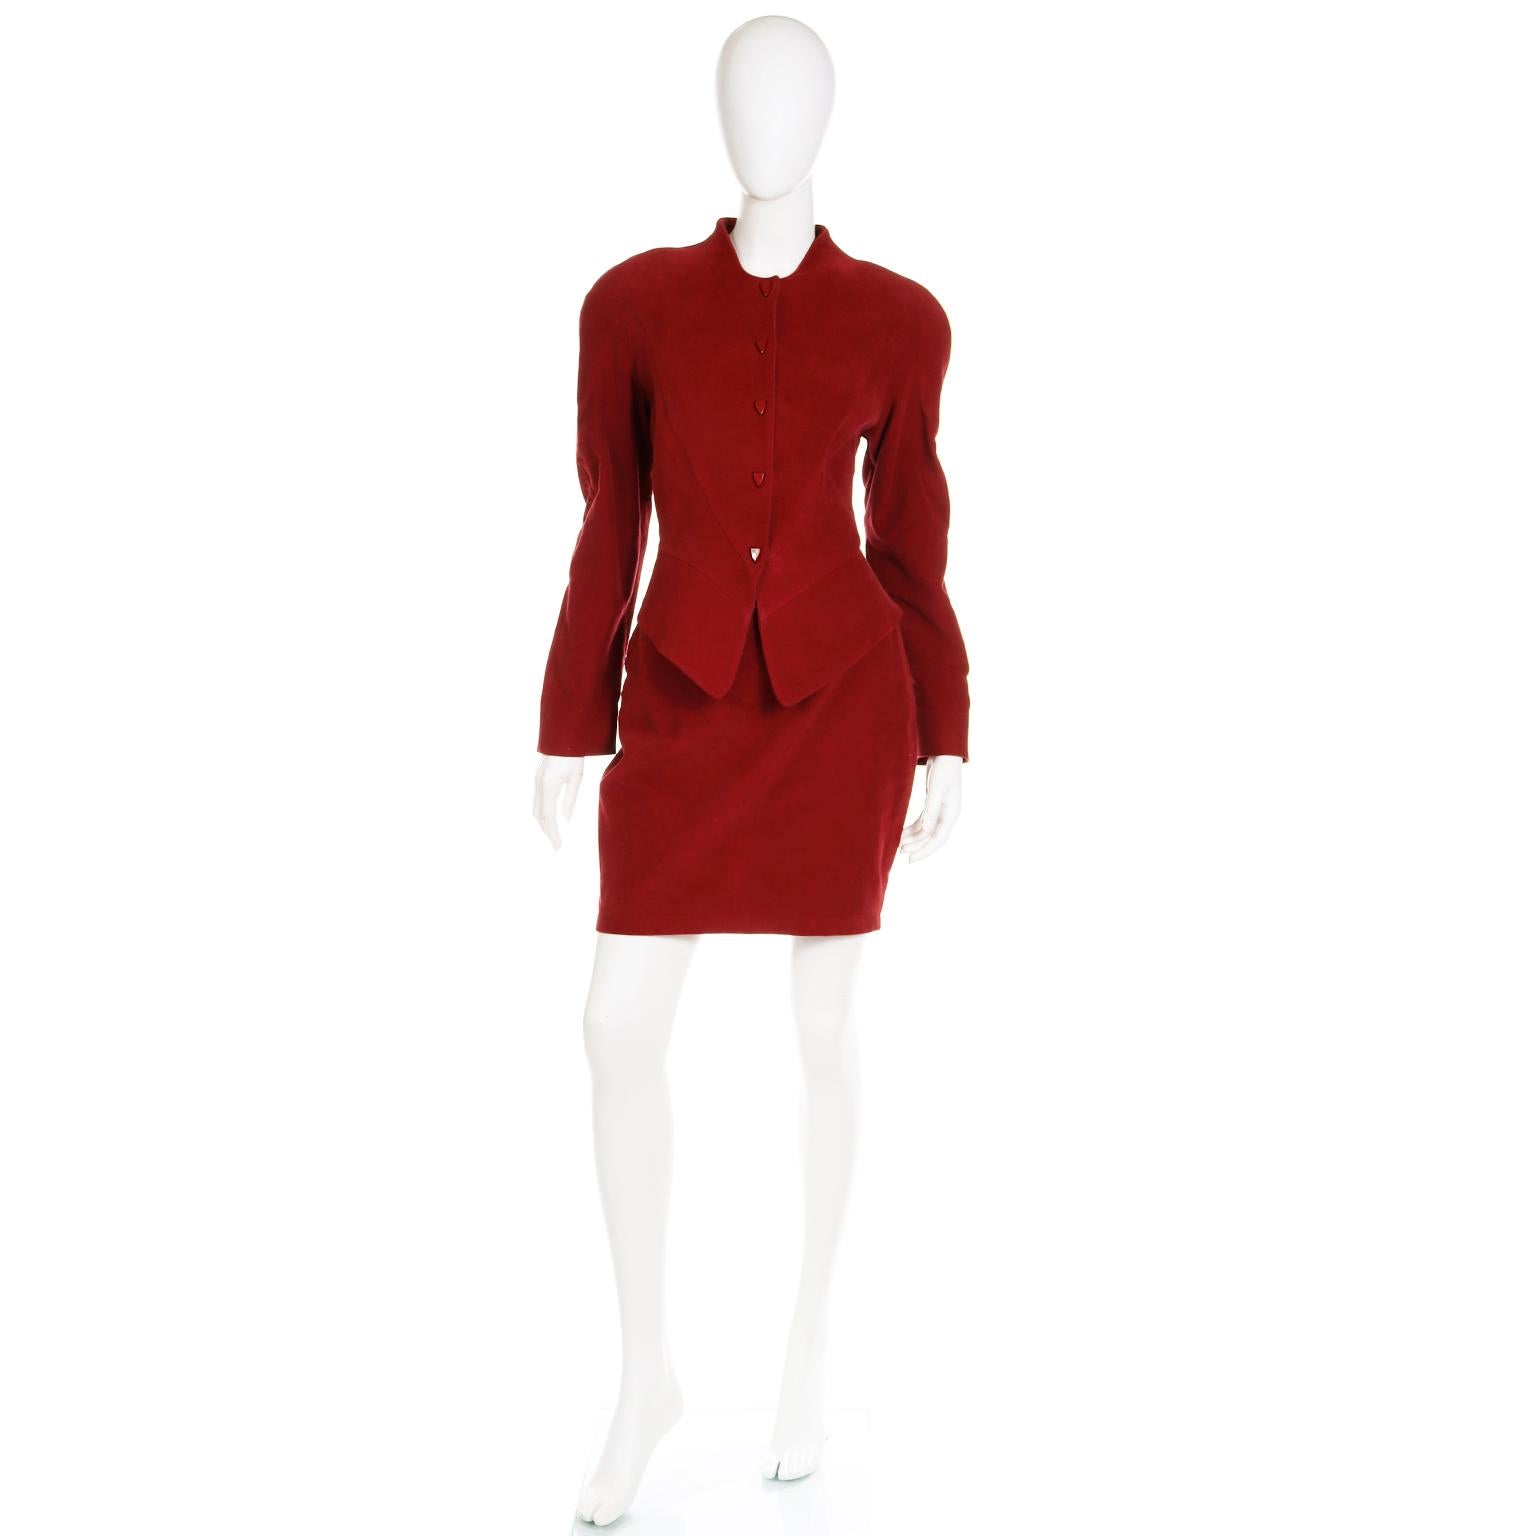 Thierry Mugler Vintage 1980s Brick Red Jacket and Skirt Suit Deadstock ...